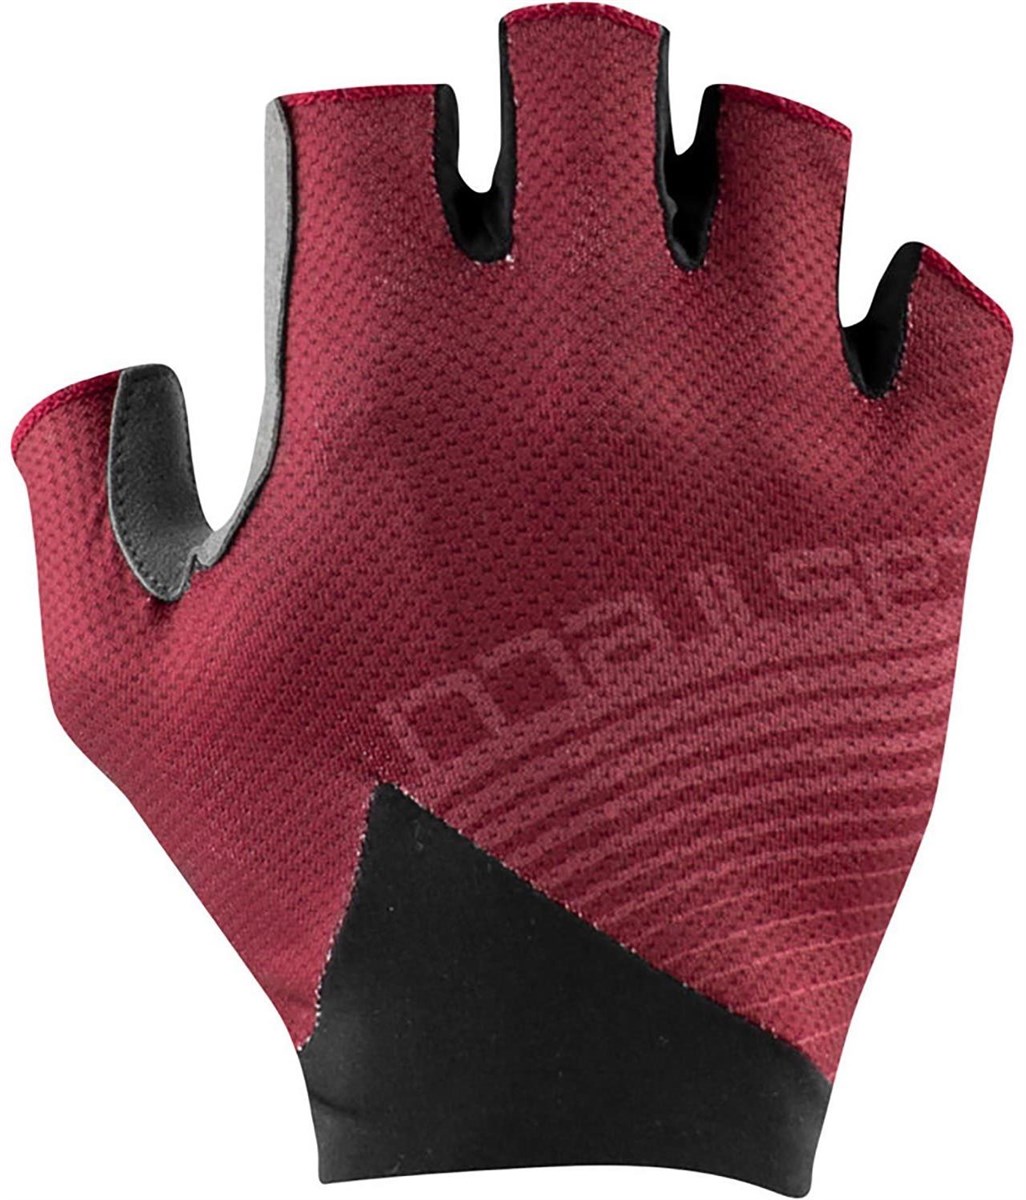 Castelli Competizione Mitts / Short Finger Gloves product image